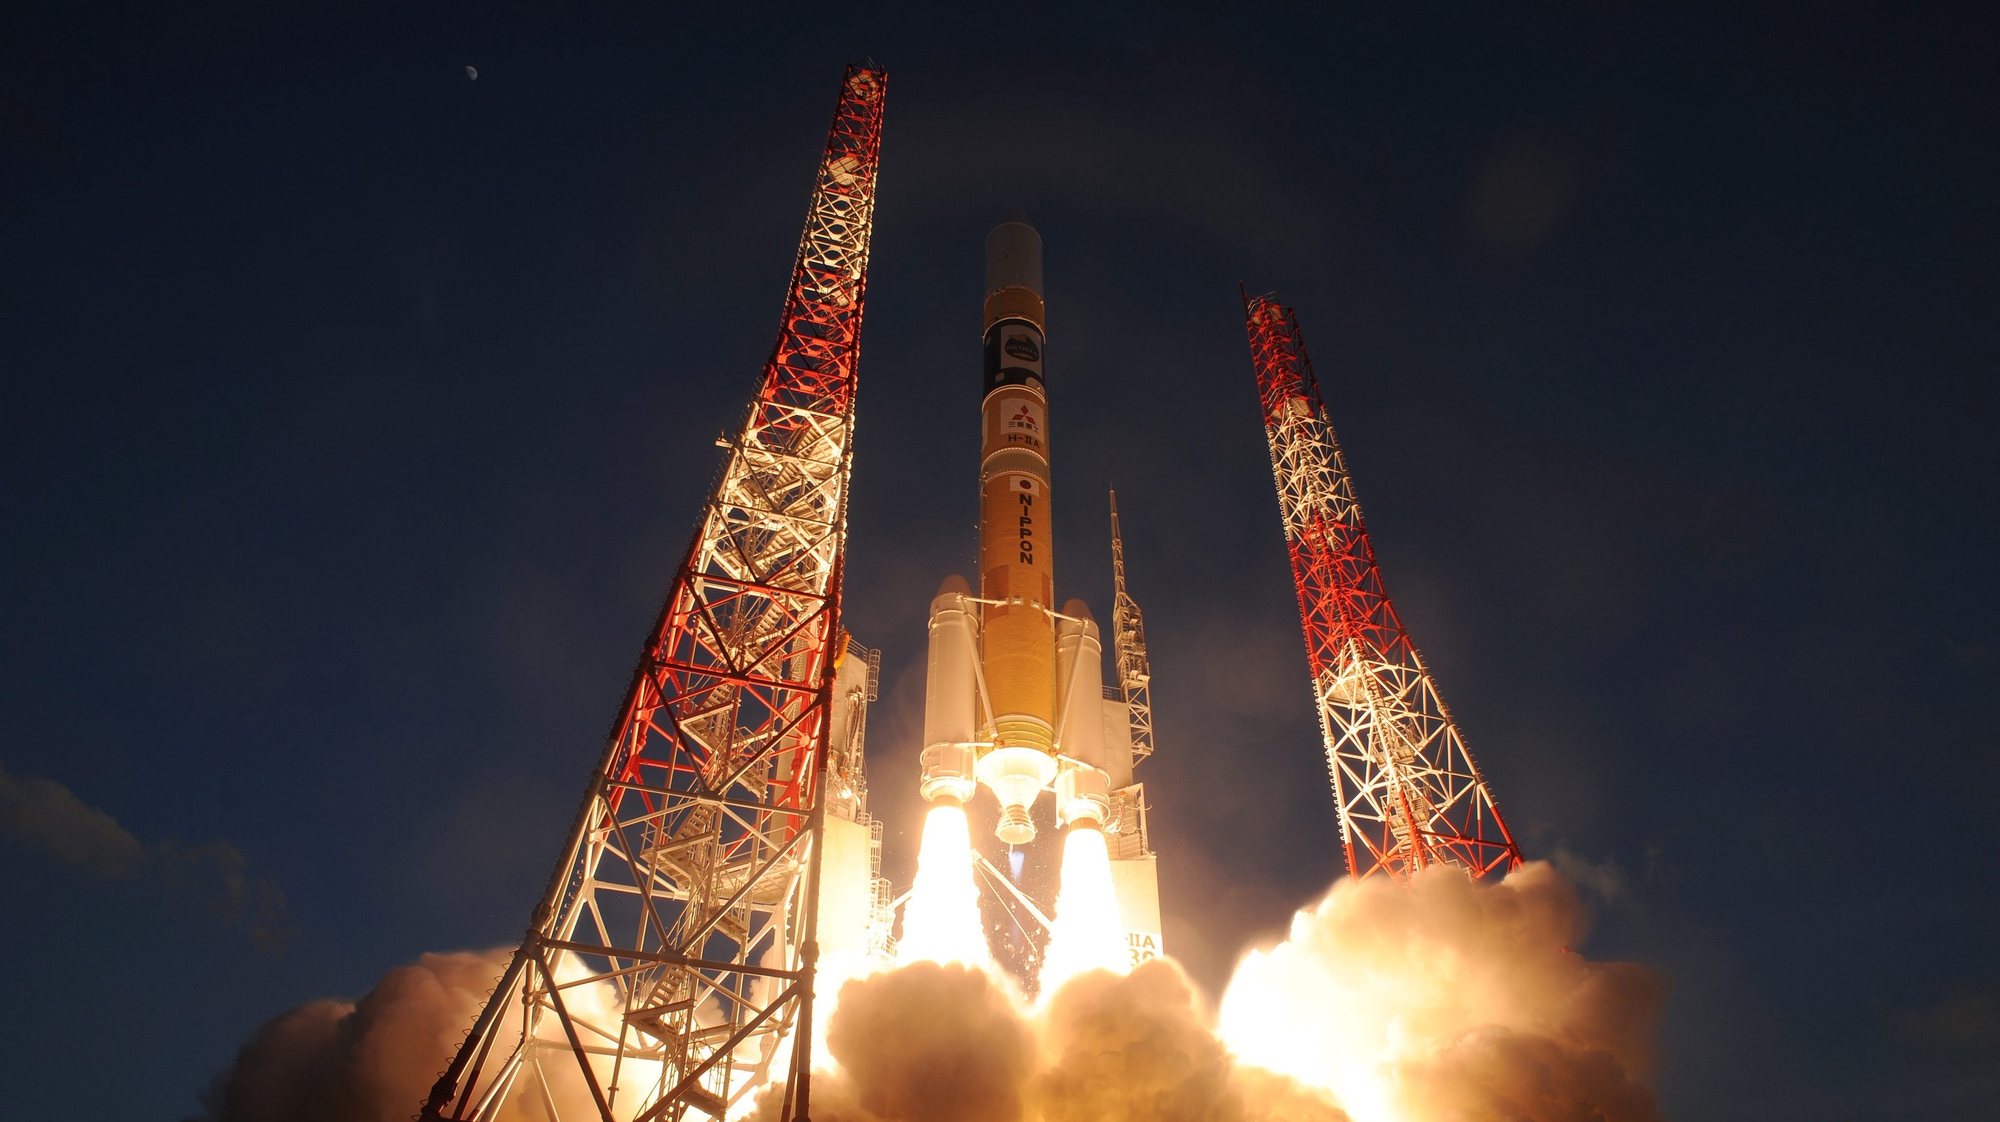 epa05166066 A handout photo taken and provided on 17 February 2016 by the Japan Aerospace Exploration Agency (JAXA) shows the liftoff of the H-2A rocket carrying the X-ray astronomy satellite &#039;ASTRO-H&#039; from the Tanegashima Space Center in Kagoshima Prefecture, southwestern Japan. According to JAXA, the launch was successful.  EPA/JAXA/HANDOUT HANDOUT EDITORIAL USE ONLY/NO SALES HANDOUT EDITORIAL USE ONLY/NO SALES